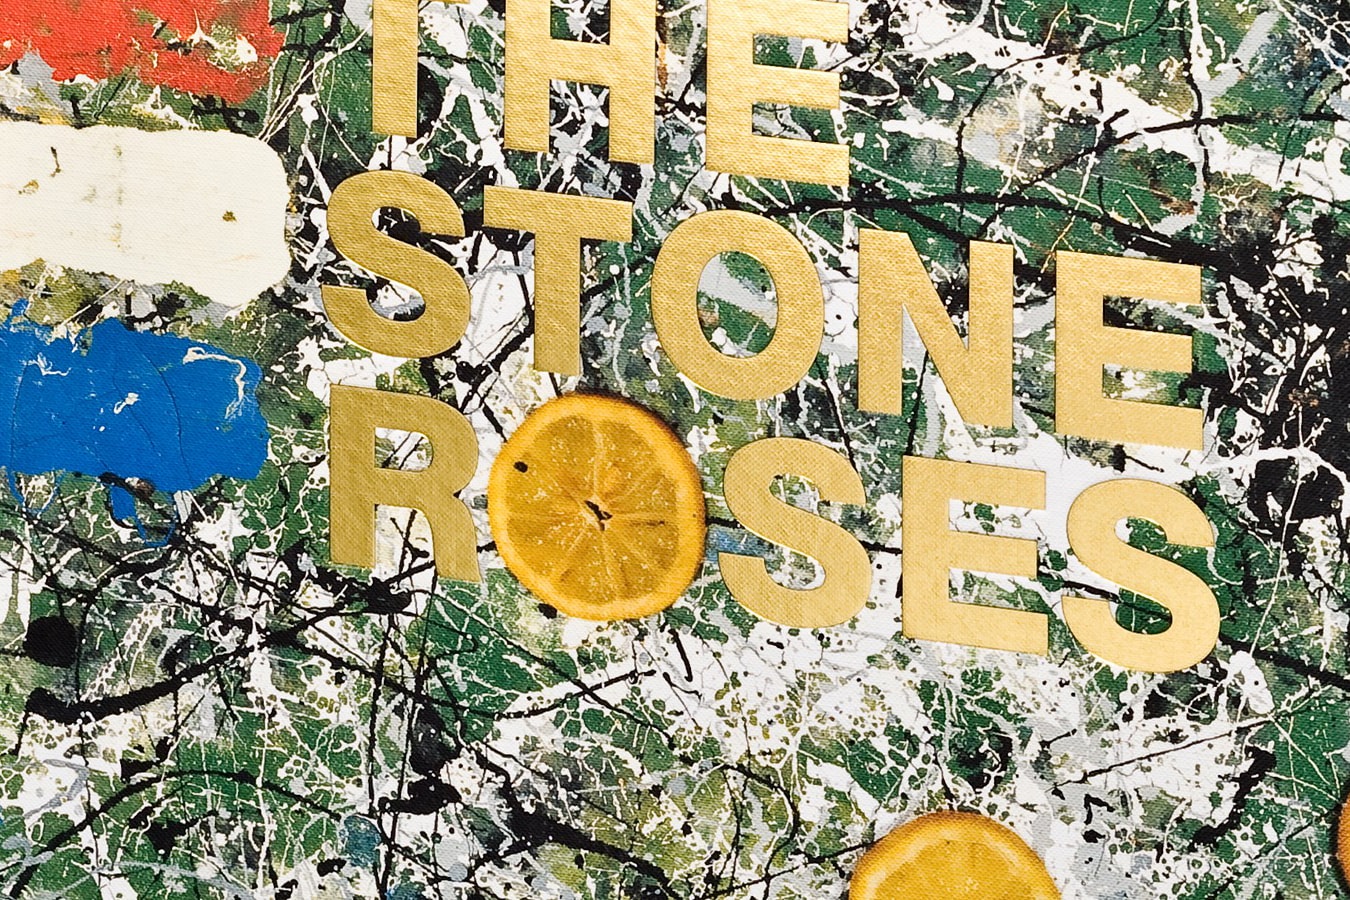 The Stone Roses announced one additional performance in Tokyo